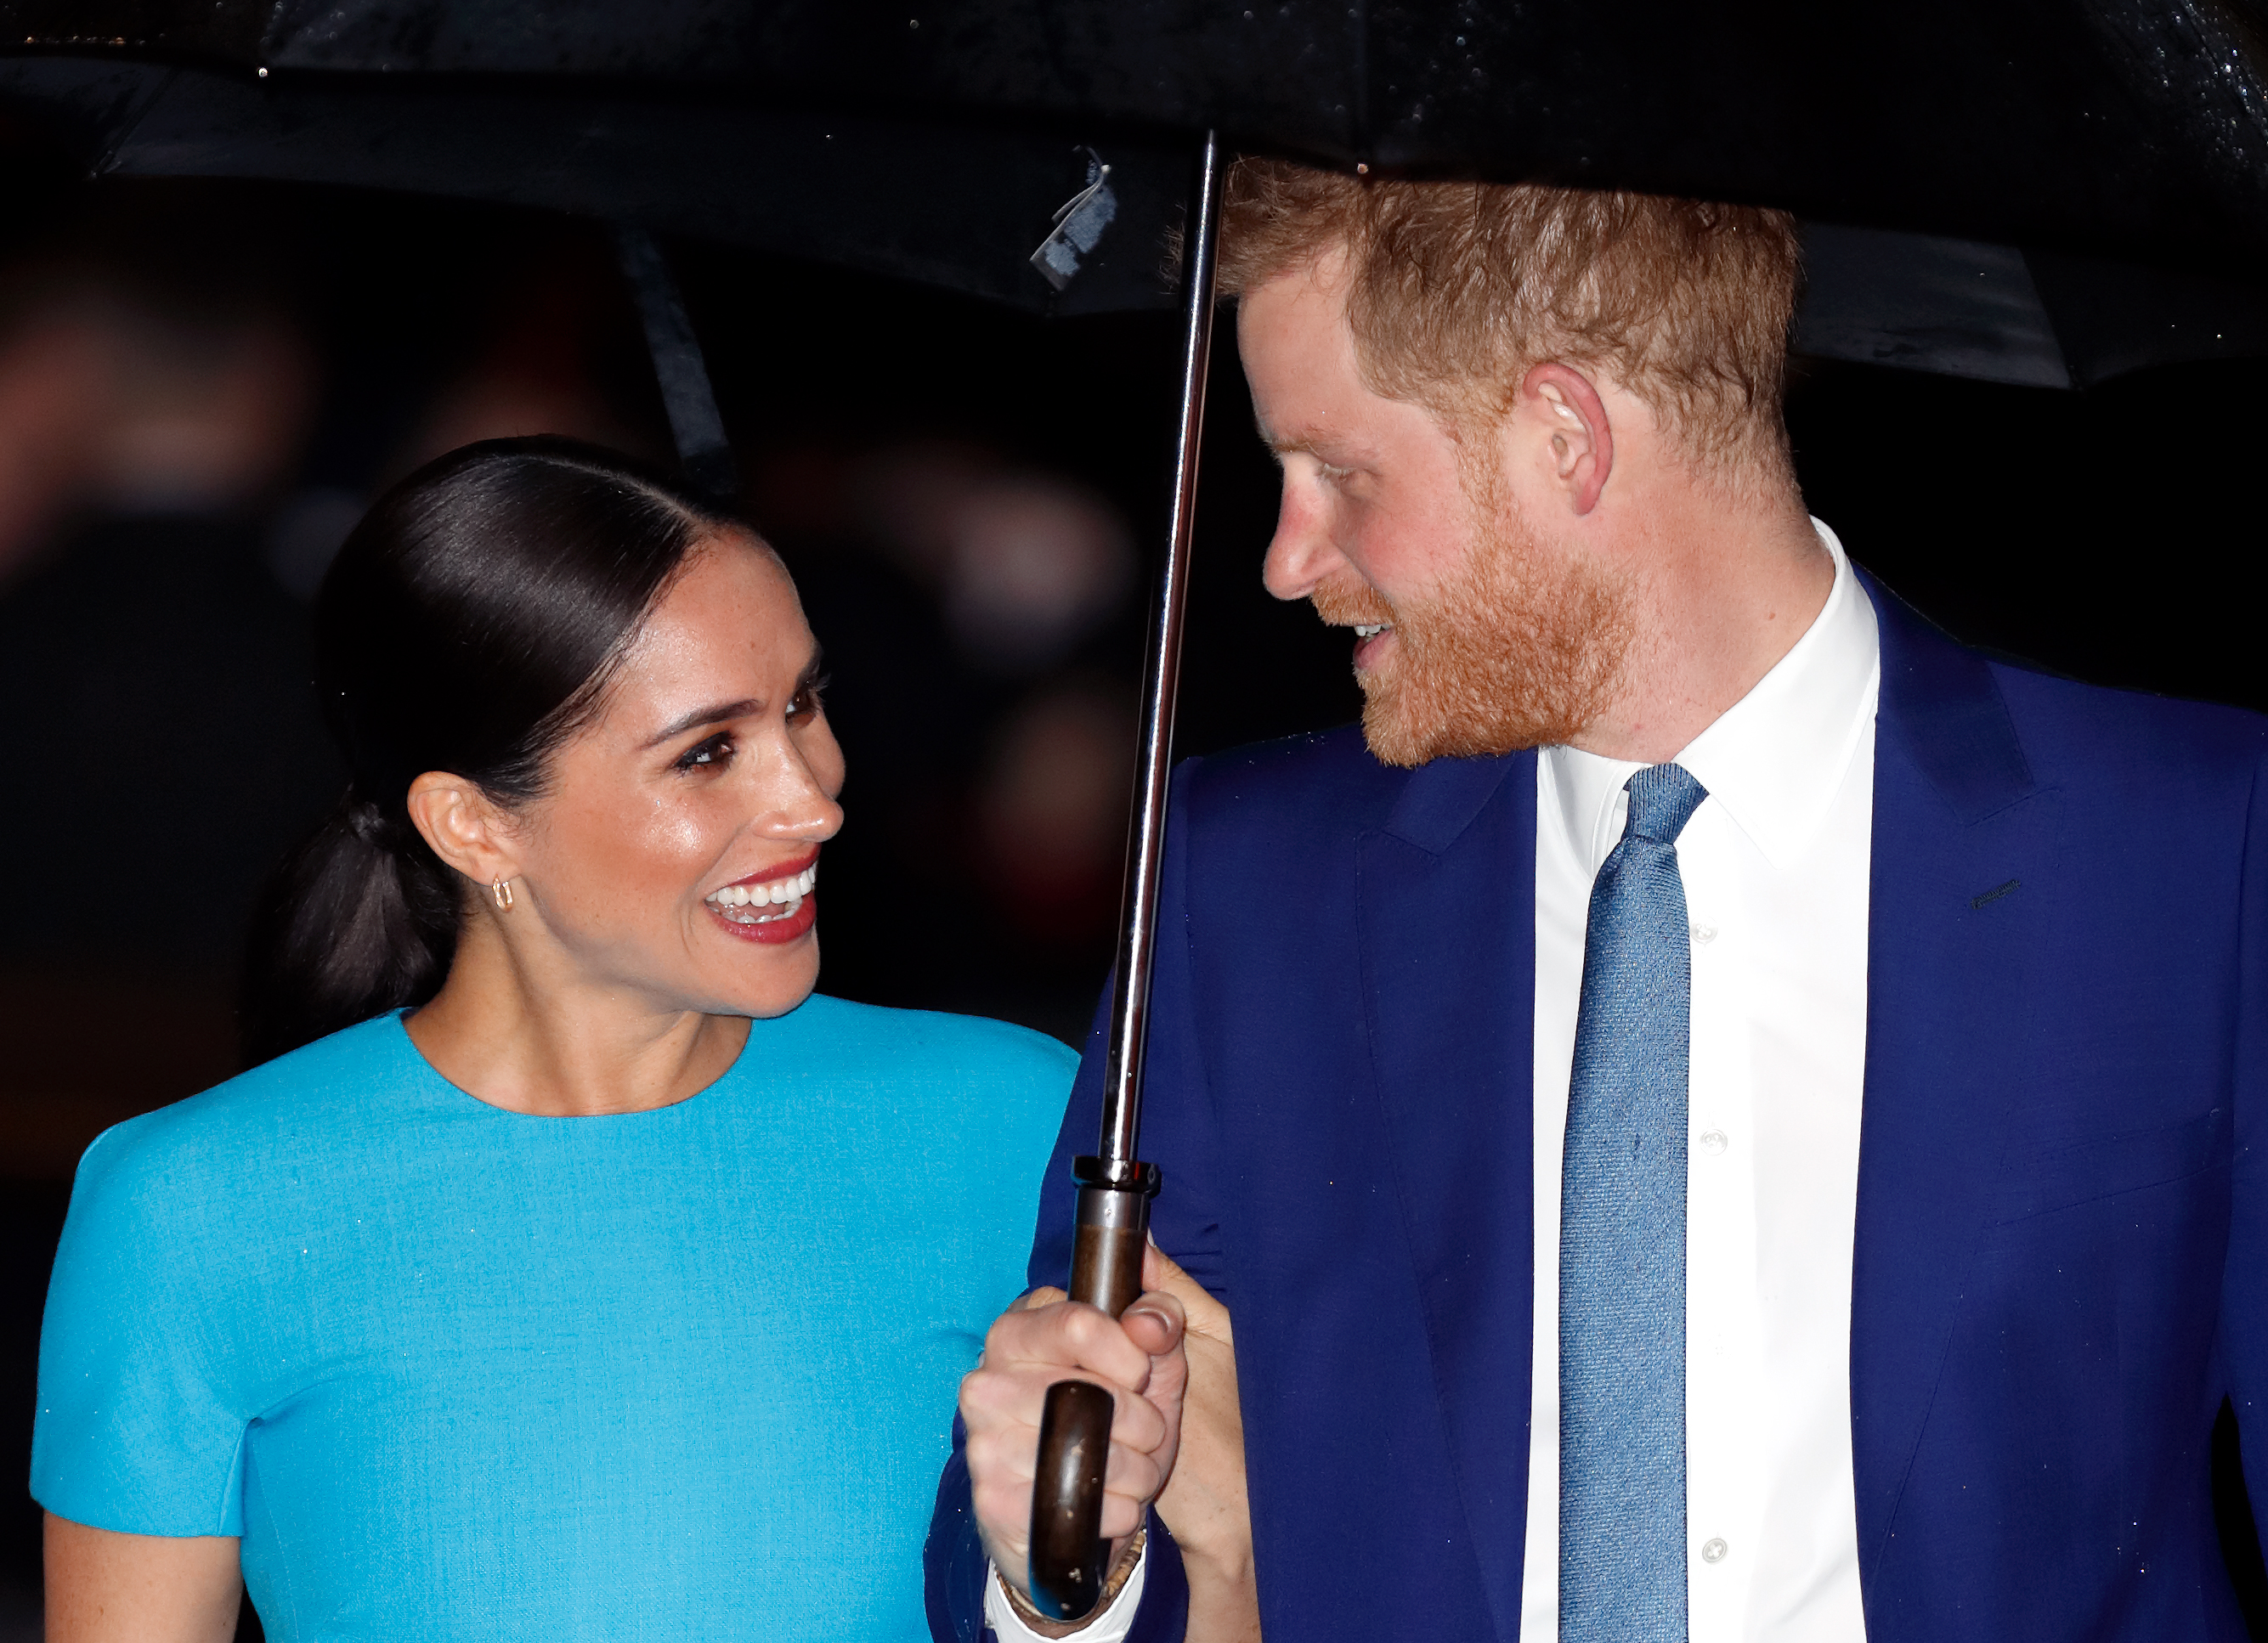 Meghan Markle and Prince Harry at The Endeavour Fund Awards in London, England on March 5, 2020 | Source: Getty Images